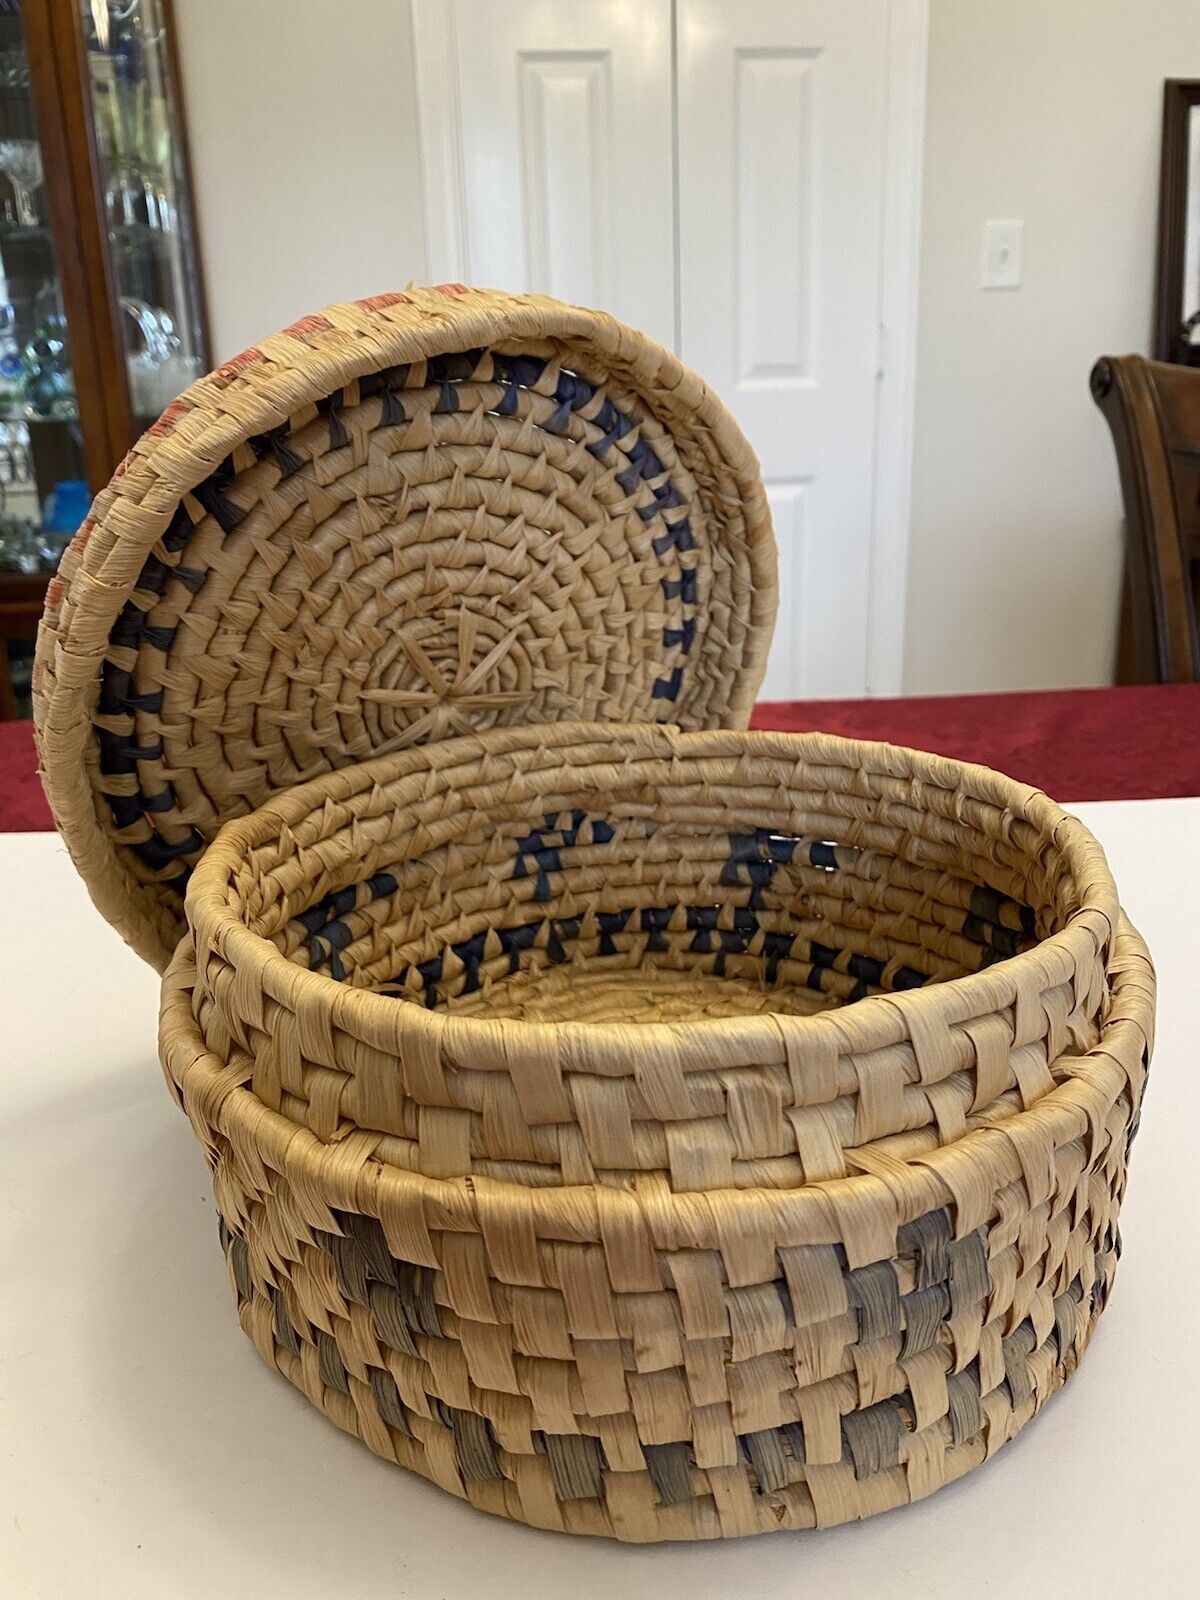 Vintage Sweet Grass Hand Woven Round Basket With Lid Multicolor 10”